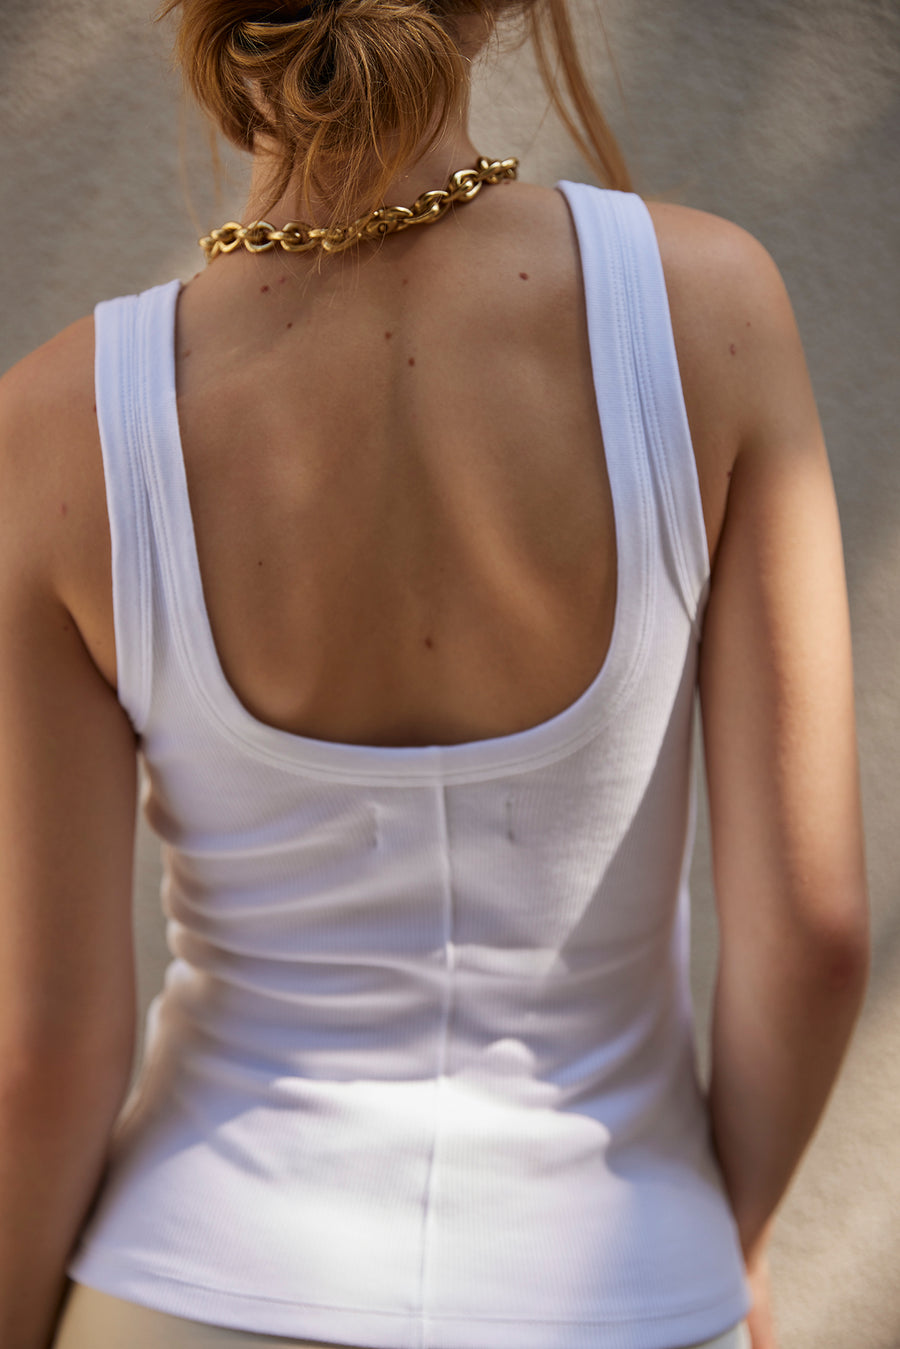 The Scoop It Up Tank in White